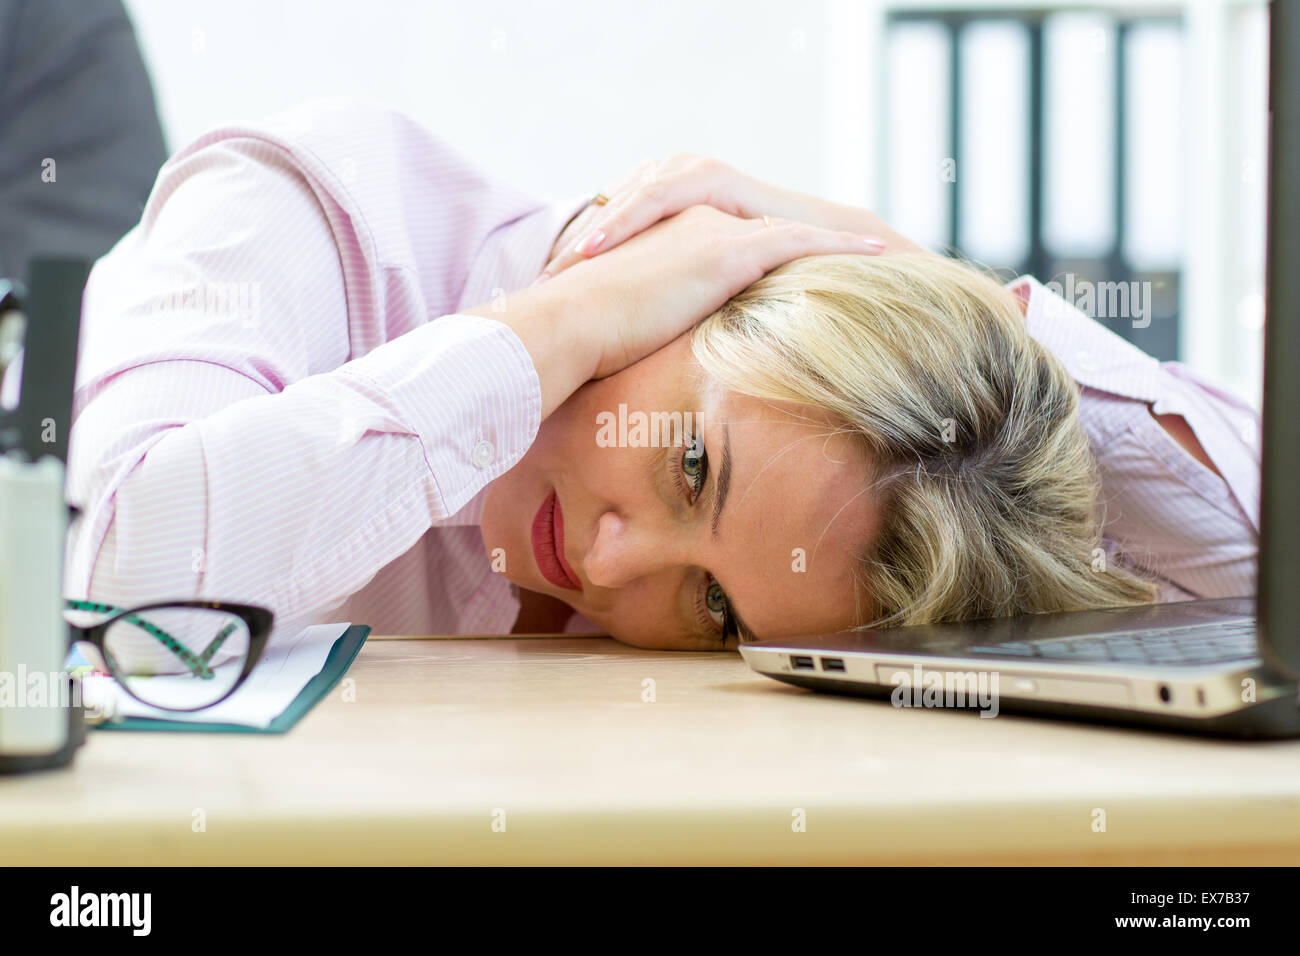 Tired middle-aged businesswoman in her office Stock Photo